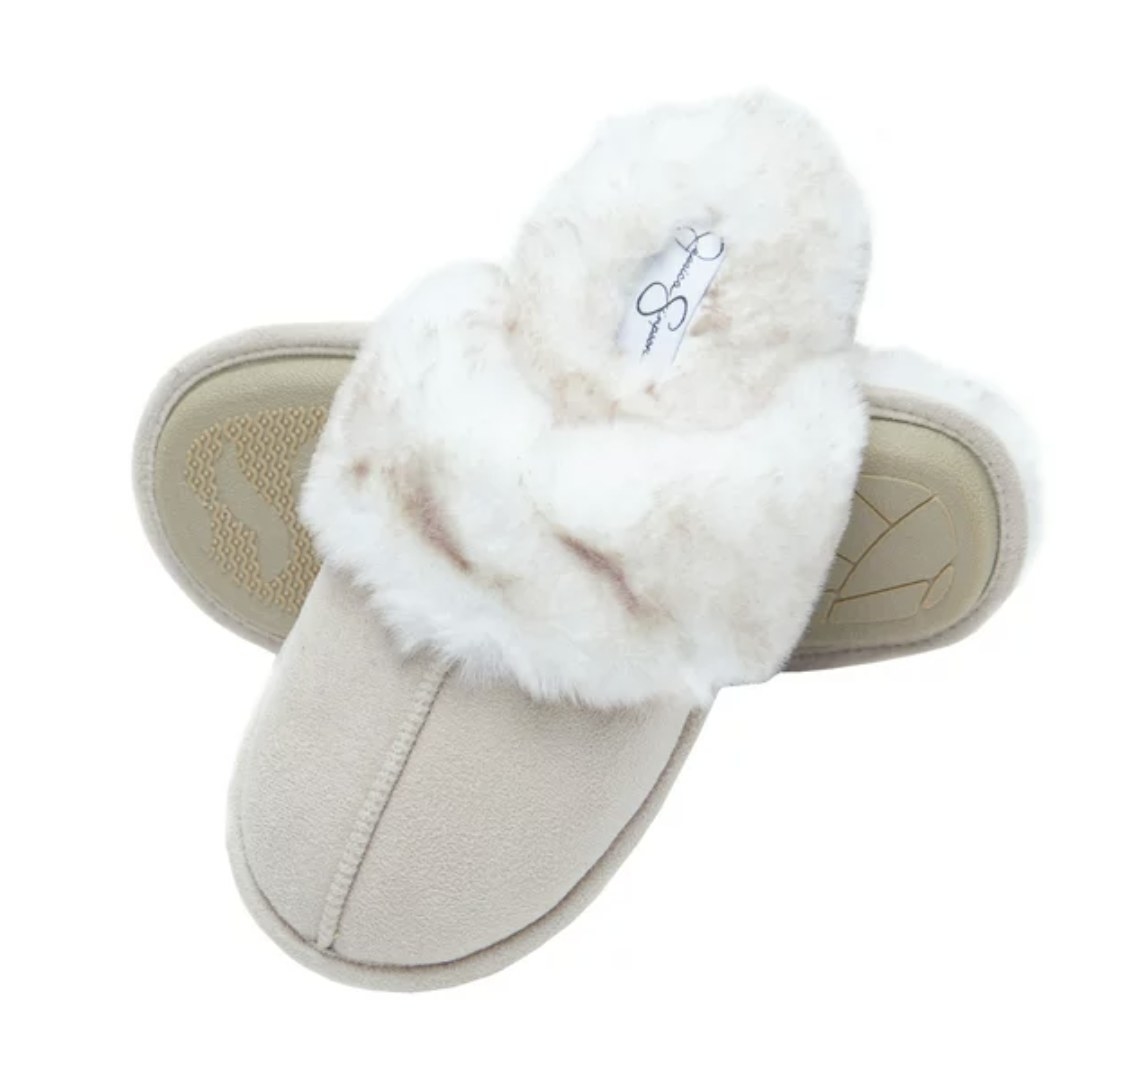 A pair of faux fur slippers